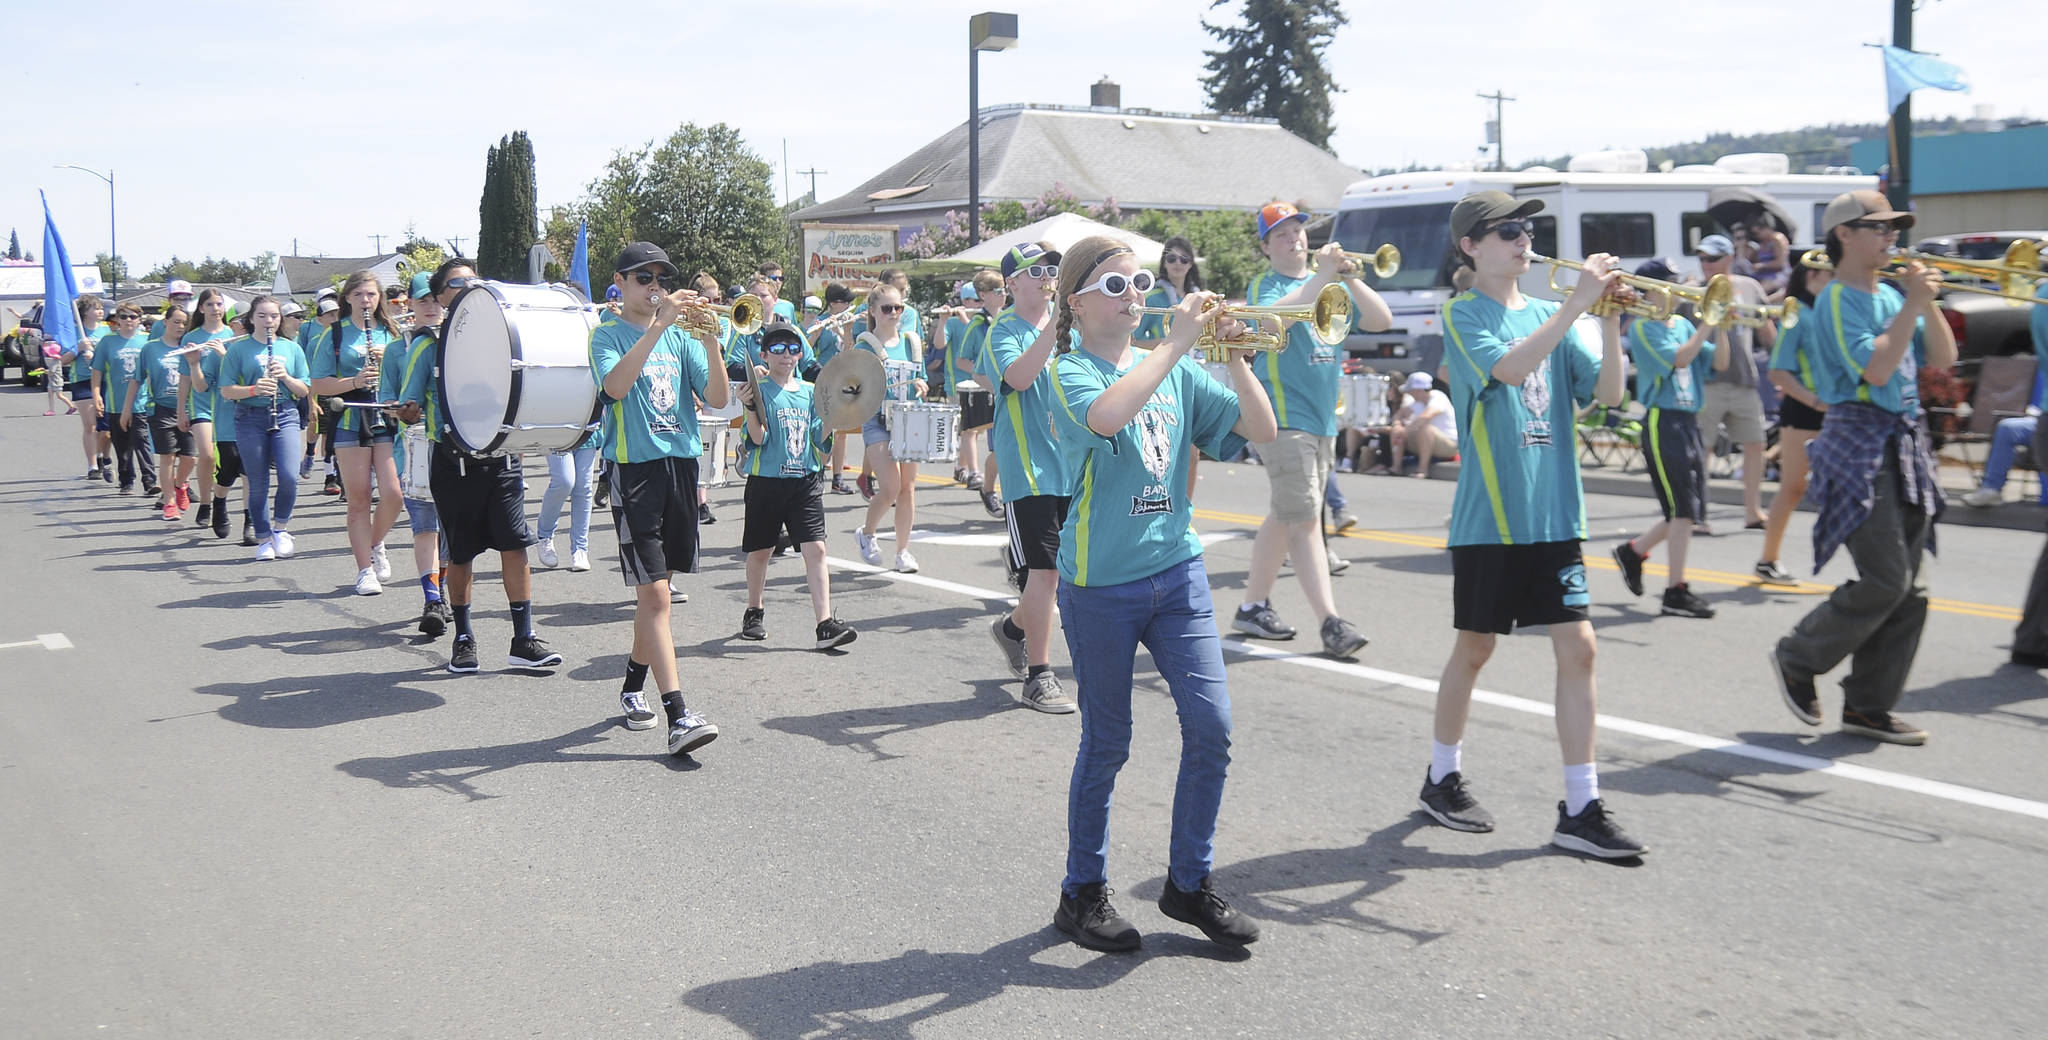 Sequim Middle School’s band marches through the 2019 Sequim Irrigation Festival’s Grand Parade. Tentatively, the Grand Parade shifts to Oct. 10 if group gathering restrictions are lifted due to the COVID-19 pandemic. Sequim Gazette photo by Michael Dashiell